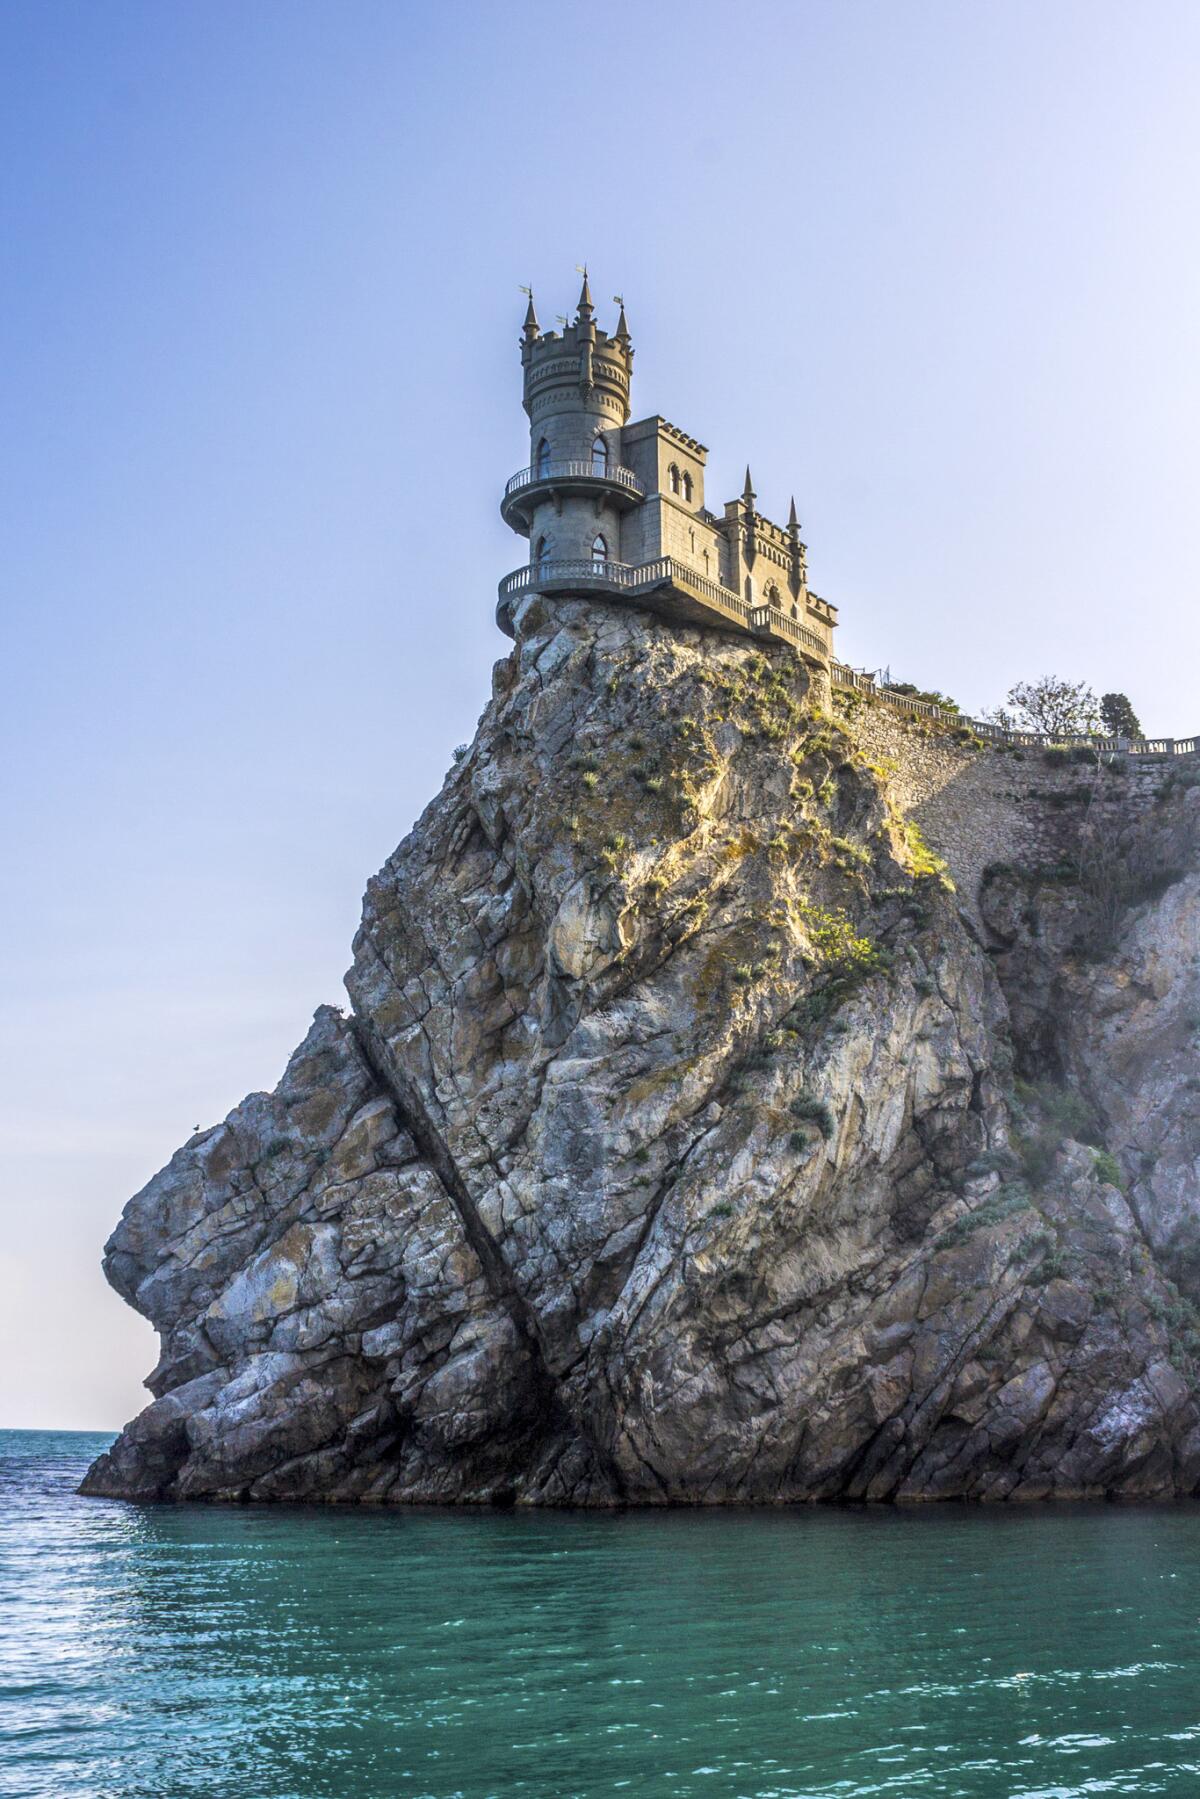 Swallow’s Nest is easily the most photographed spot in Crimea.